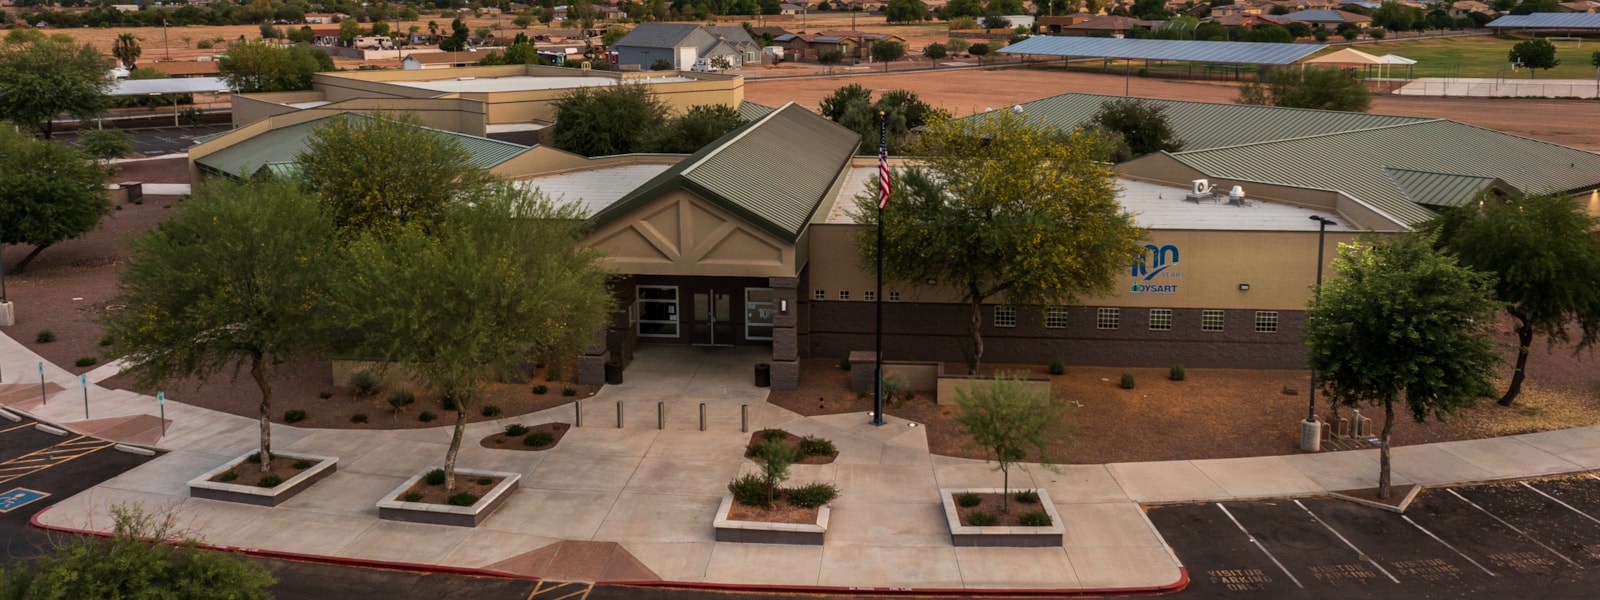 aerial view of Dysart District office